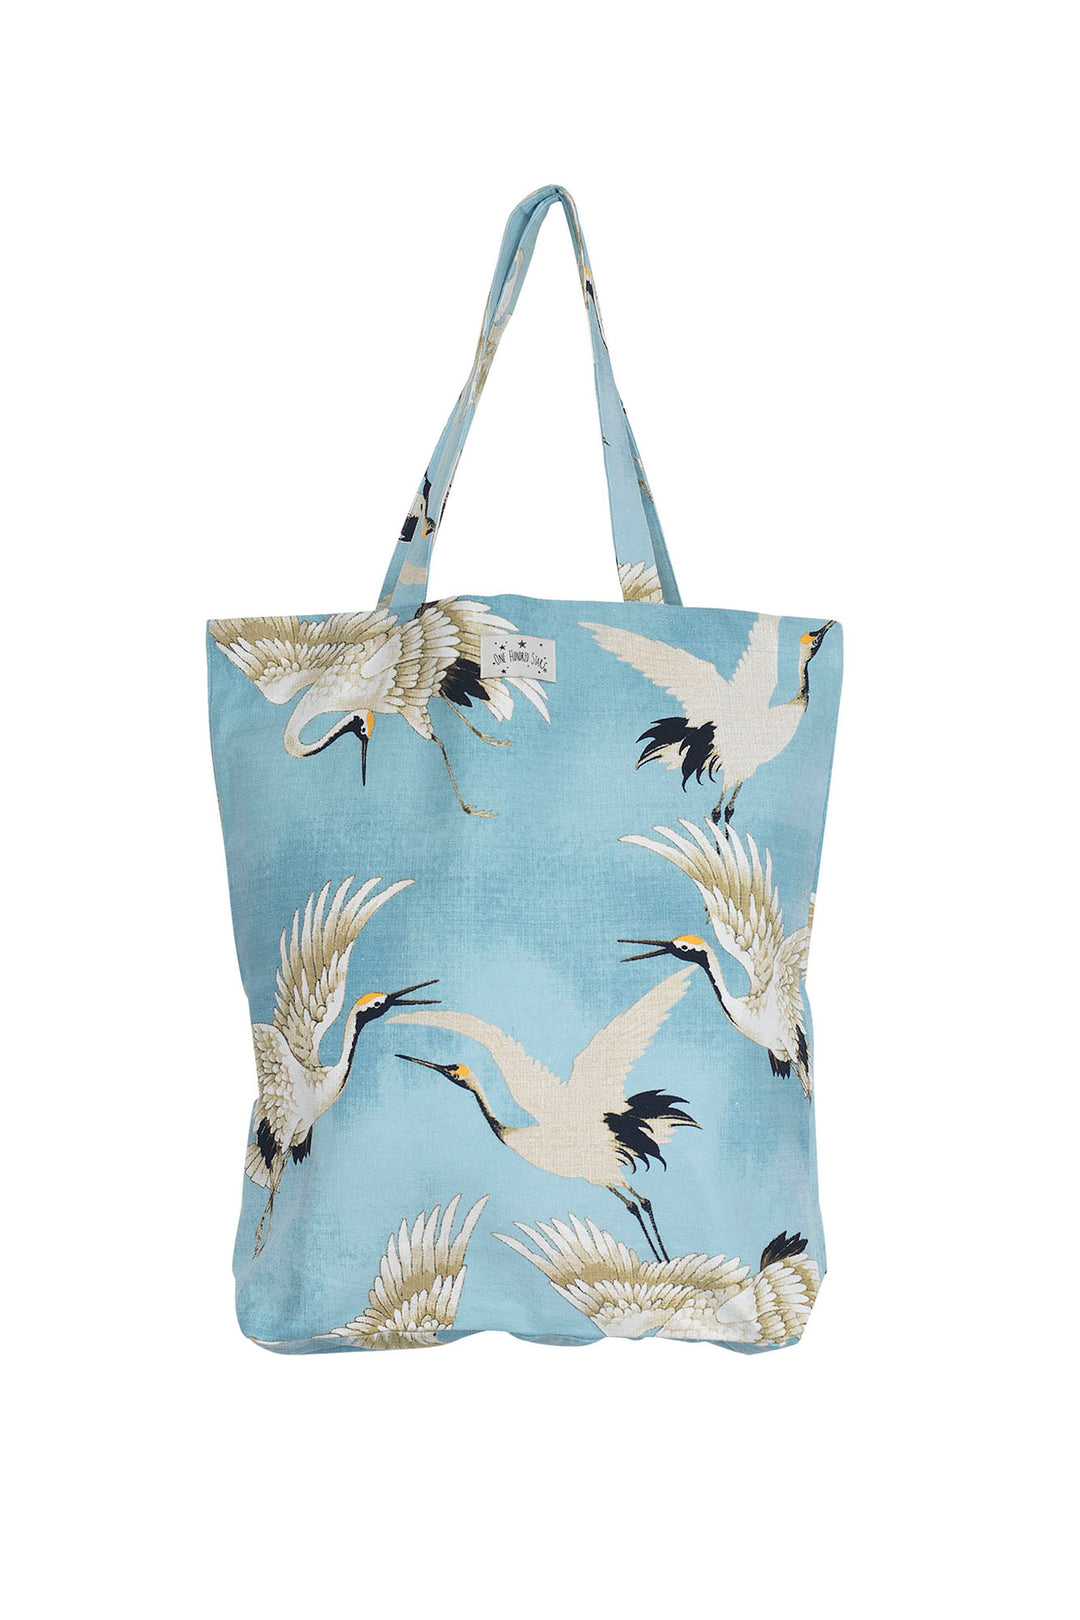 One Hundred Stars Stork Crane Sky Blue Bag - This 100% sustainable cotton bag, is just as versatile as it is beautiful. Whether it becomes your go to reusable shopping bag, a classic tote for keeping your books in or a chic beach bag, this classic blue and white print is sure to turn heads!